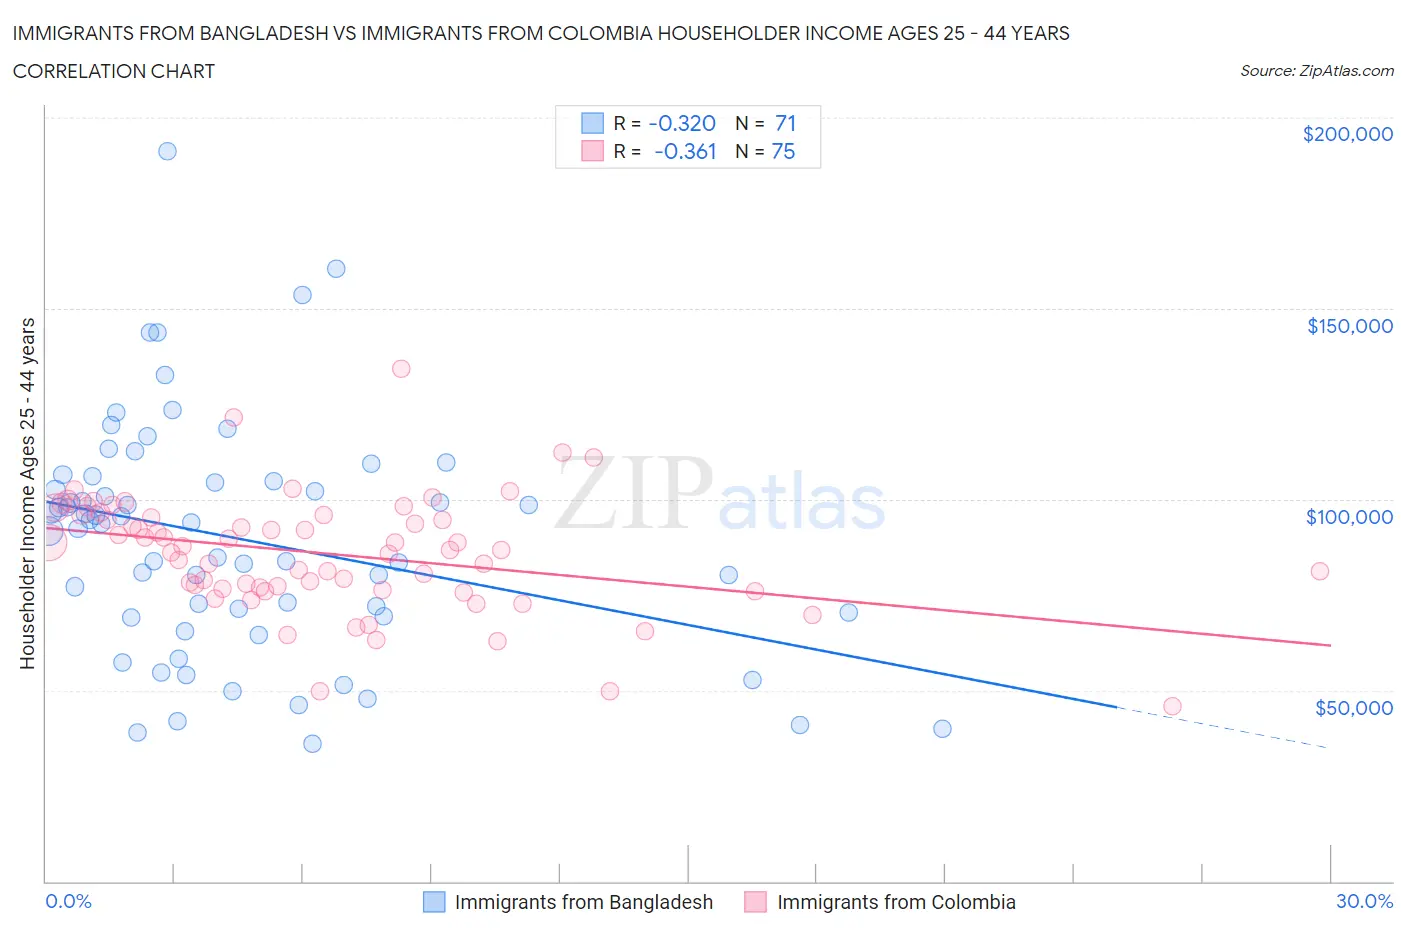 Immigrants from Bangladesh vs Immigrants from Colombia Householder Income Ages 25 - 44 years